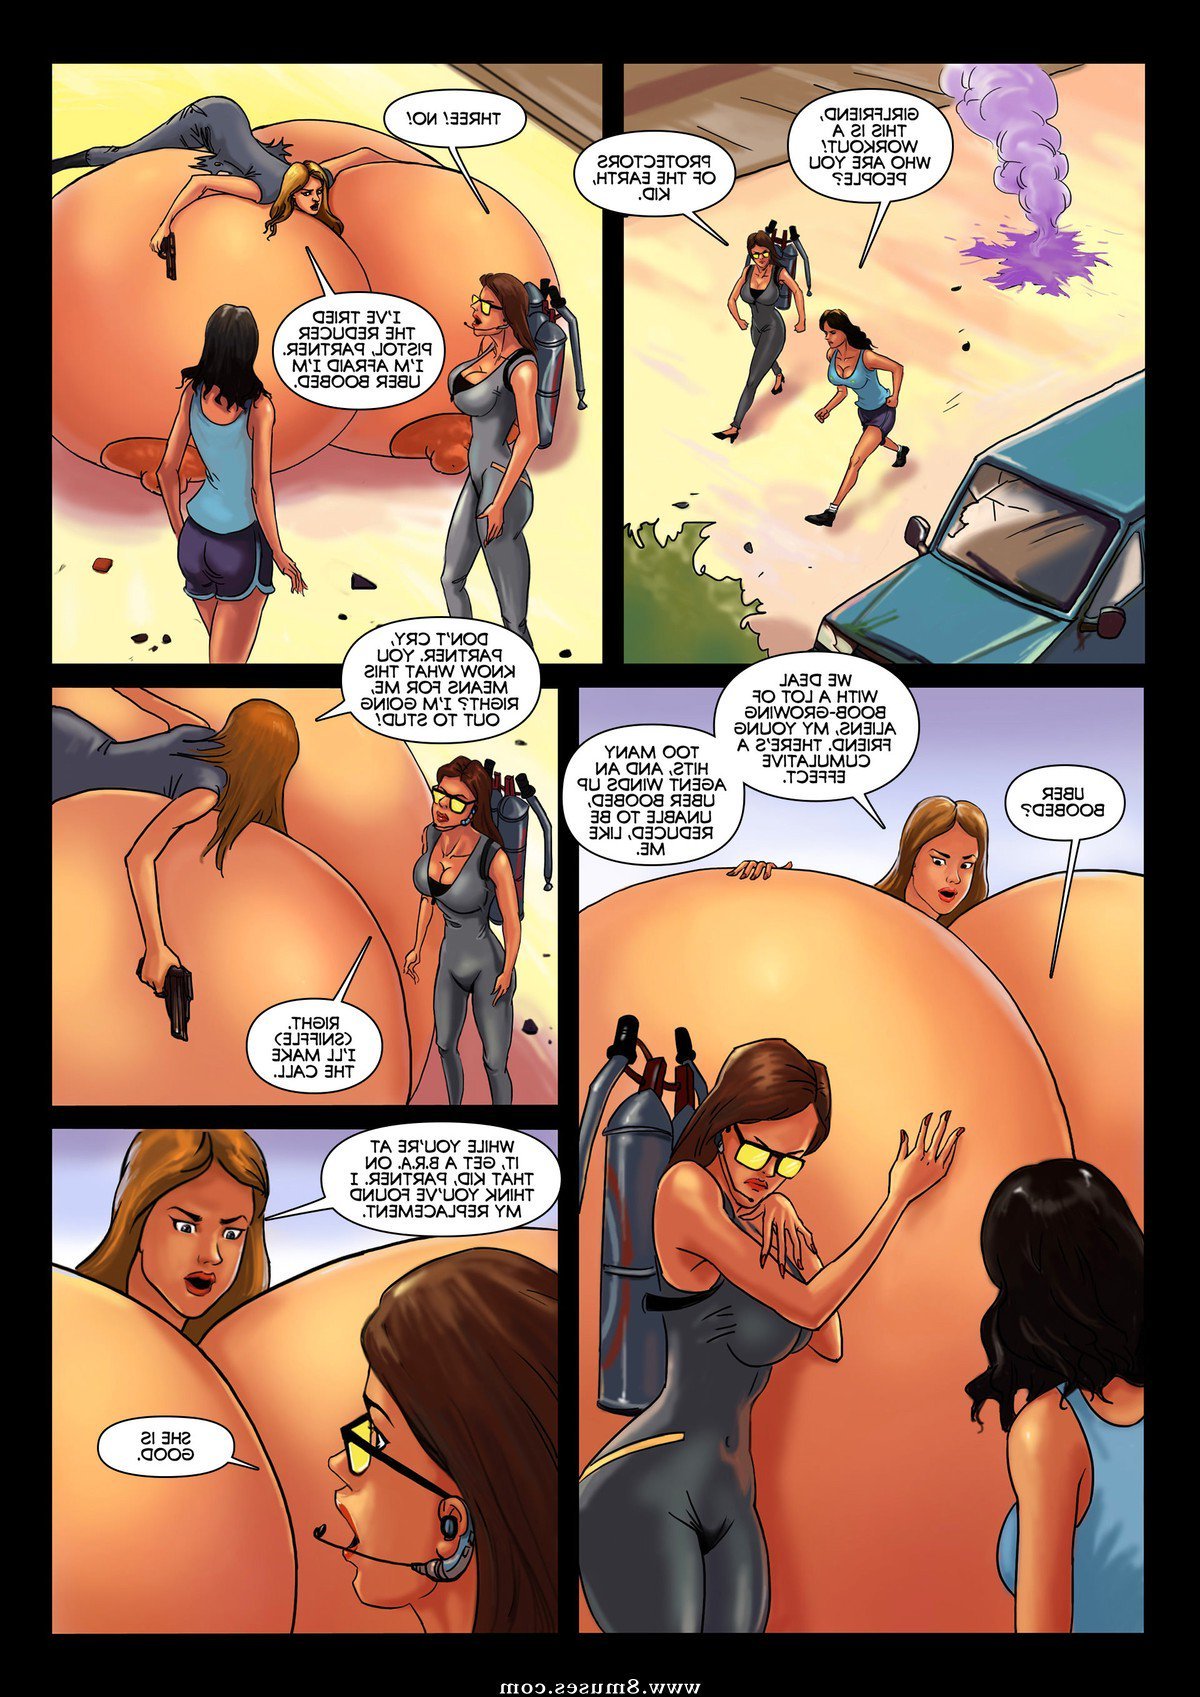 Expansionfan-Comics/Girls-in-Grey/Issue-1 Girls_in_Grey_-_Issue_1_14.jpg